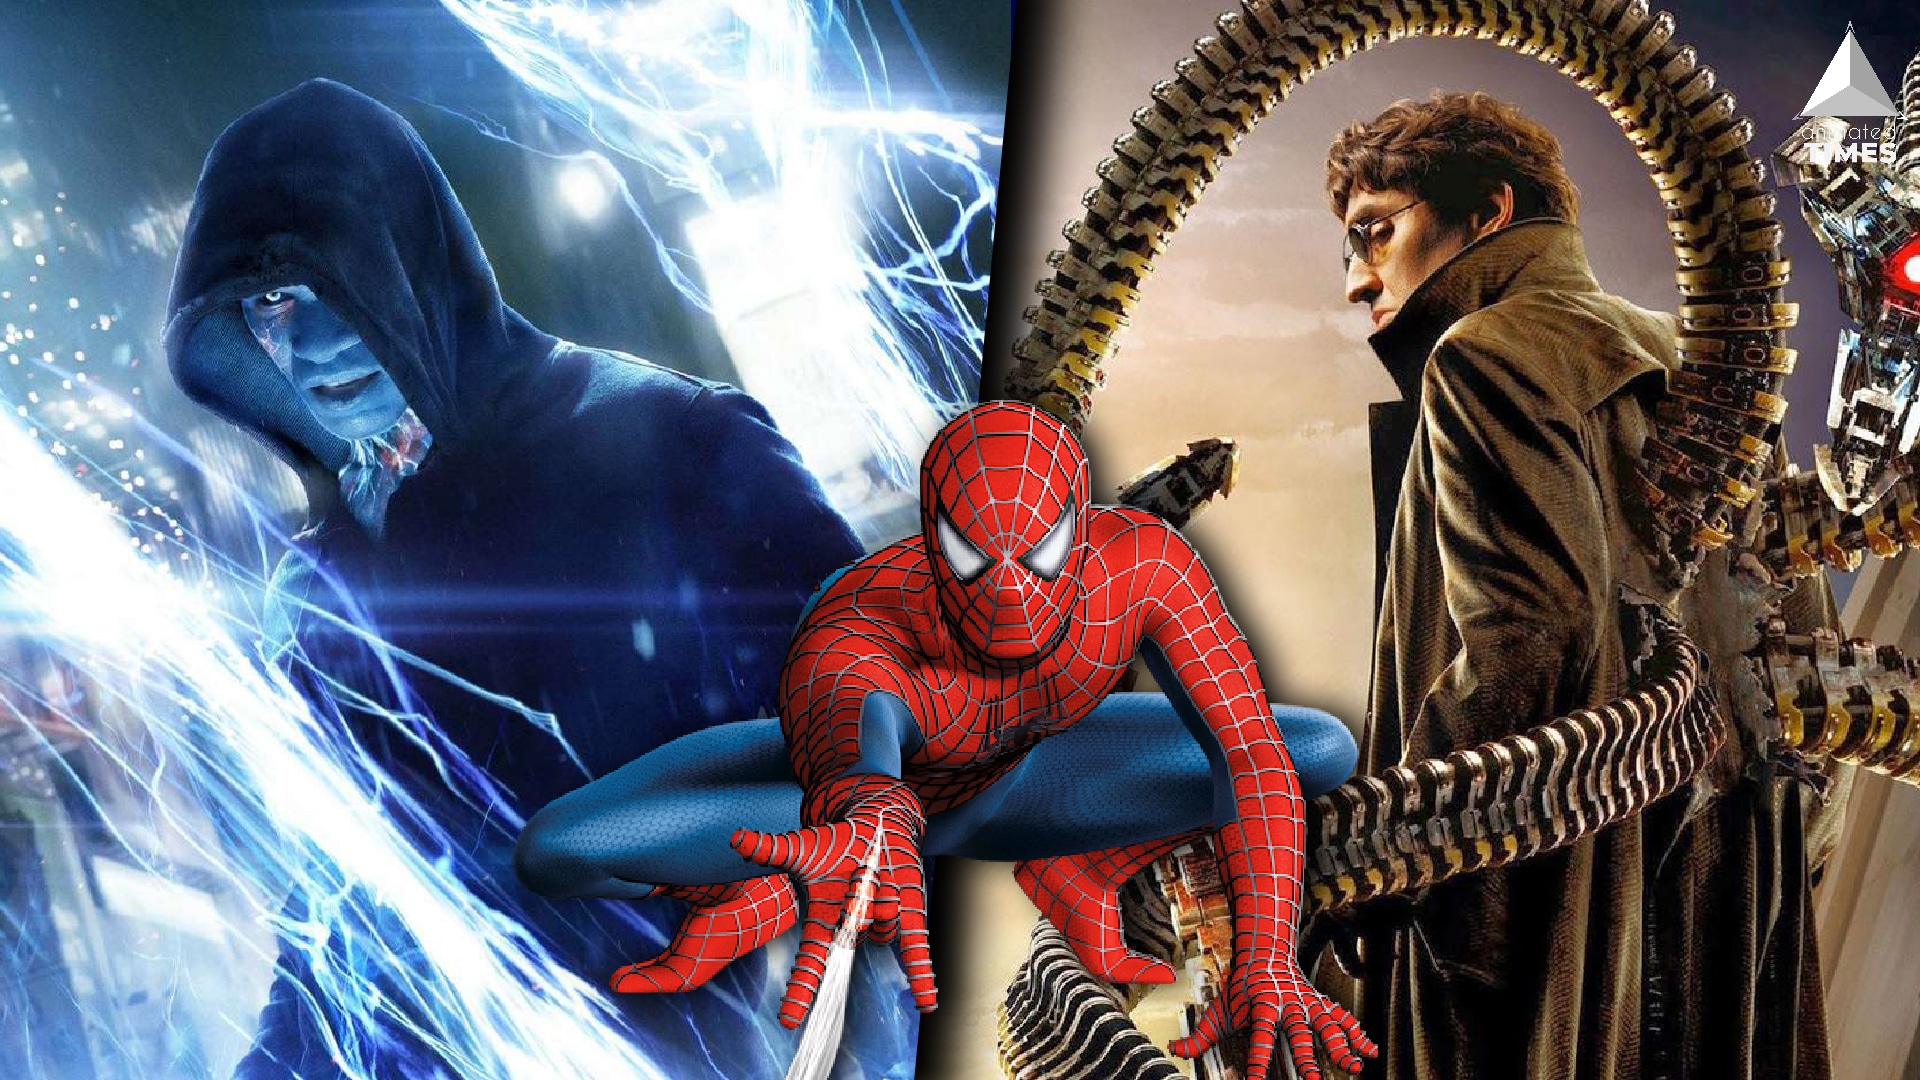 Spiderman 3 Theory: How will Doctor Octopus and Electro Return?